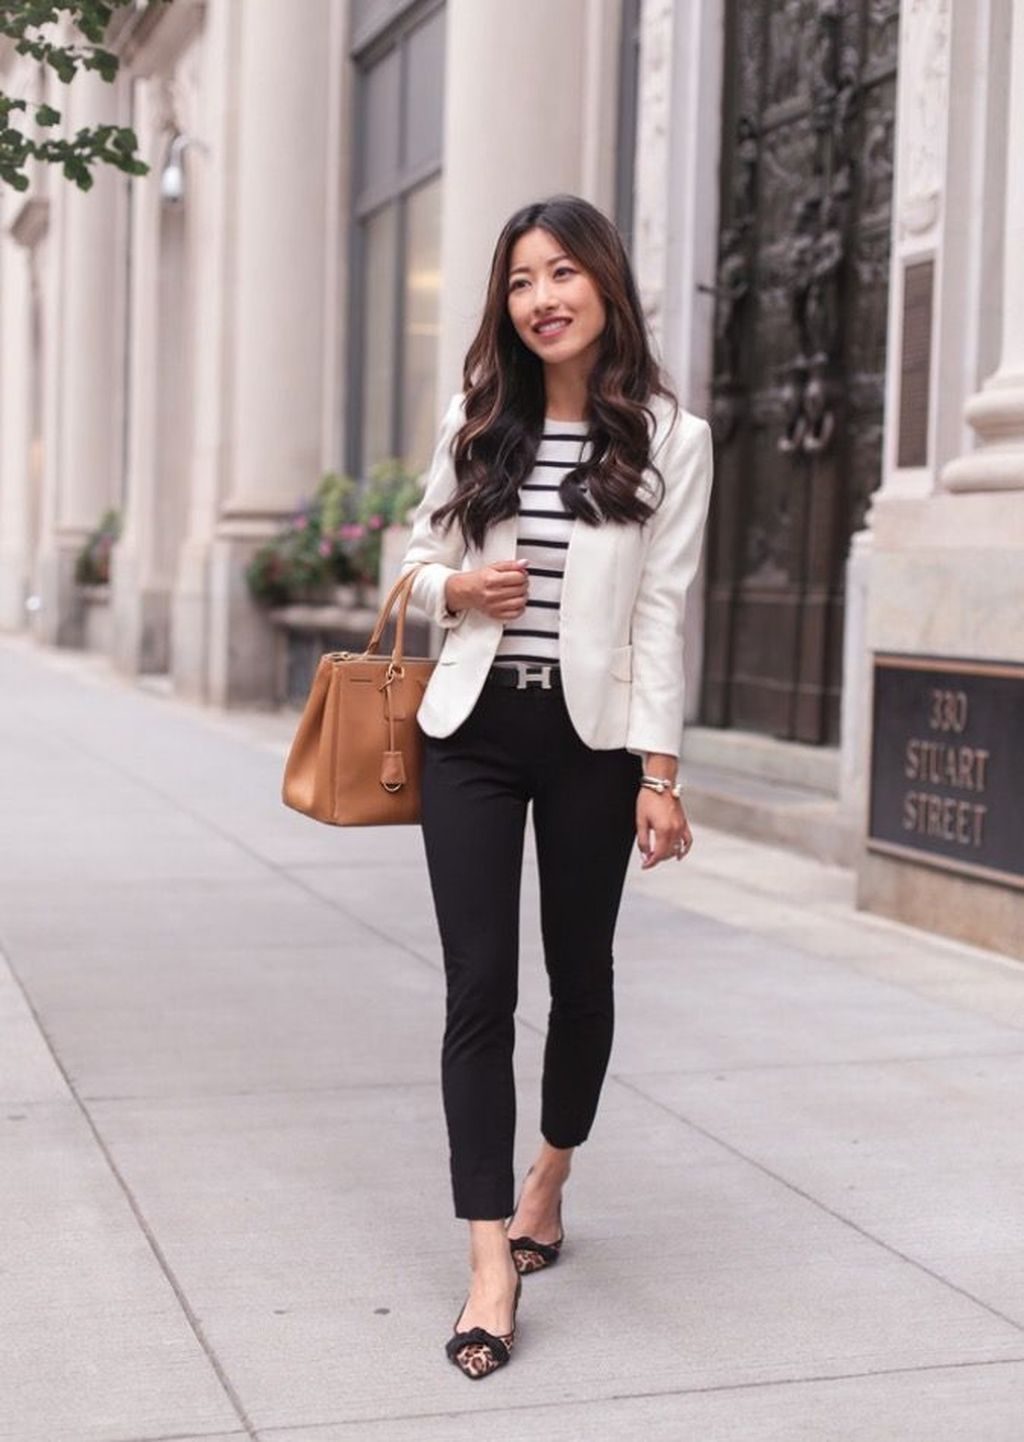 48 Attractive Business Casual Outfits For Women 2020